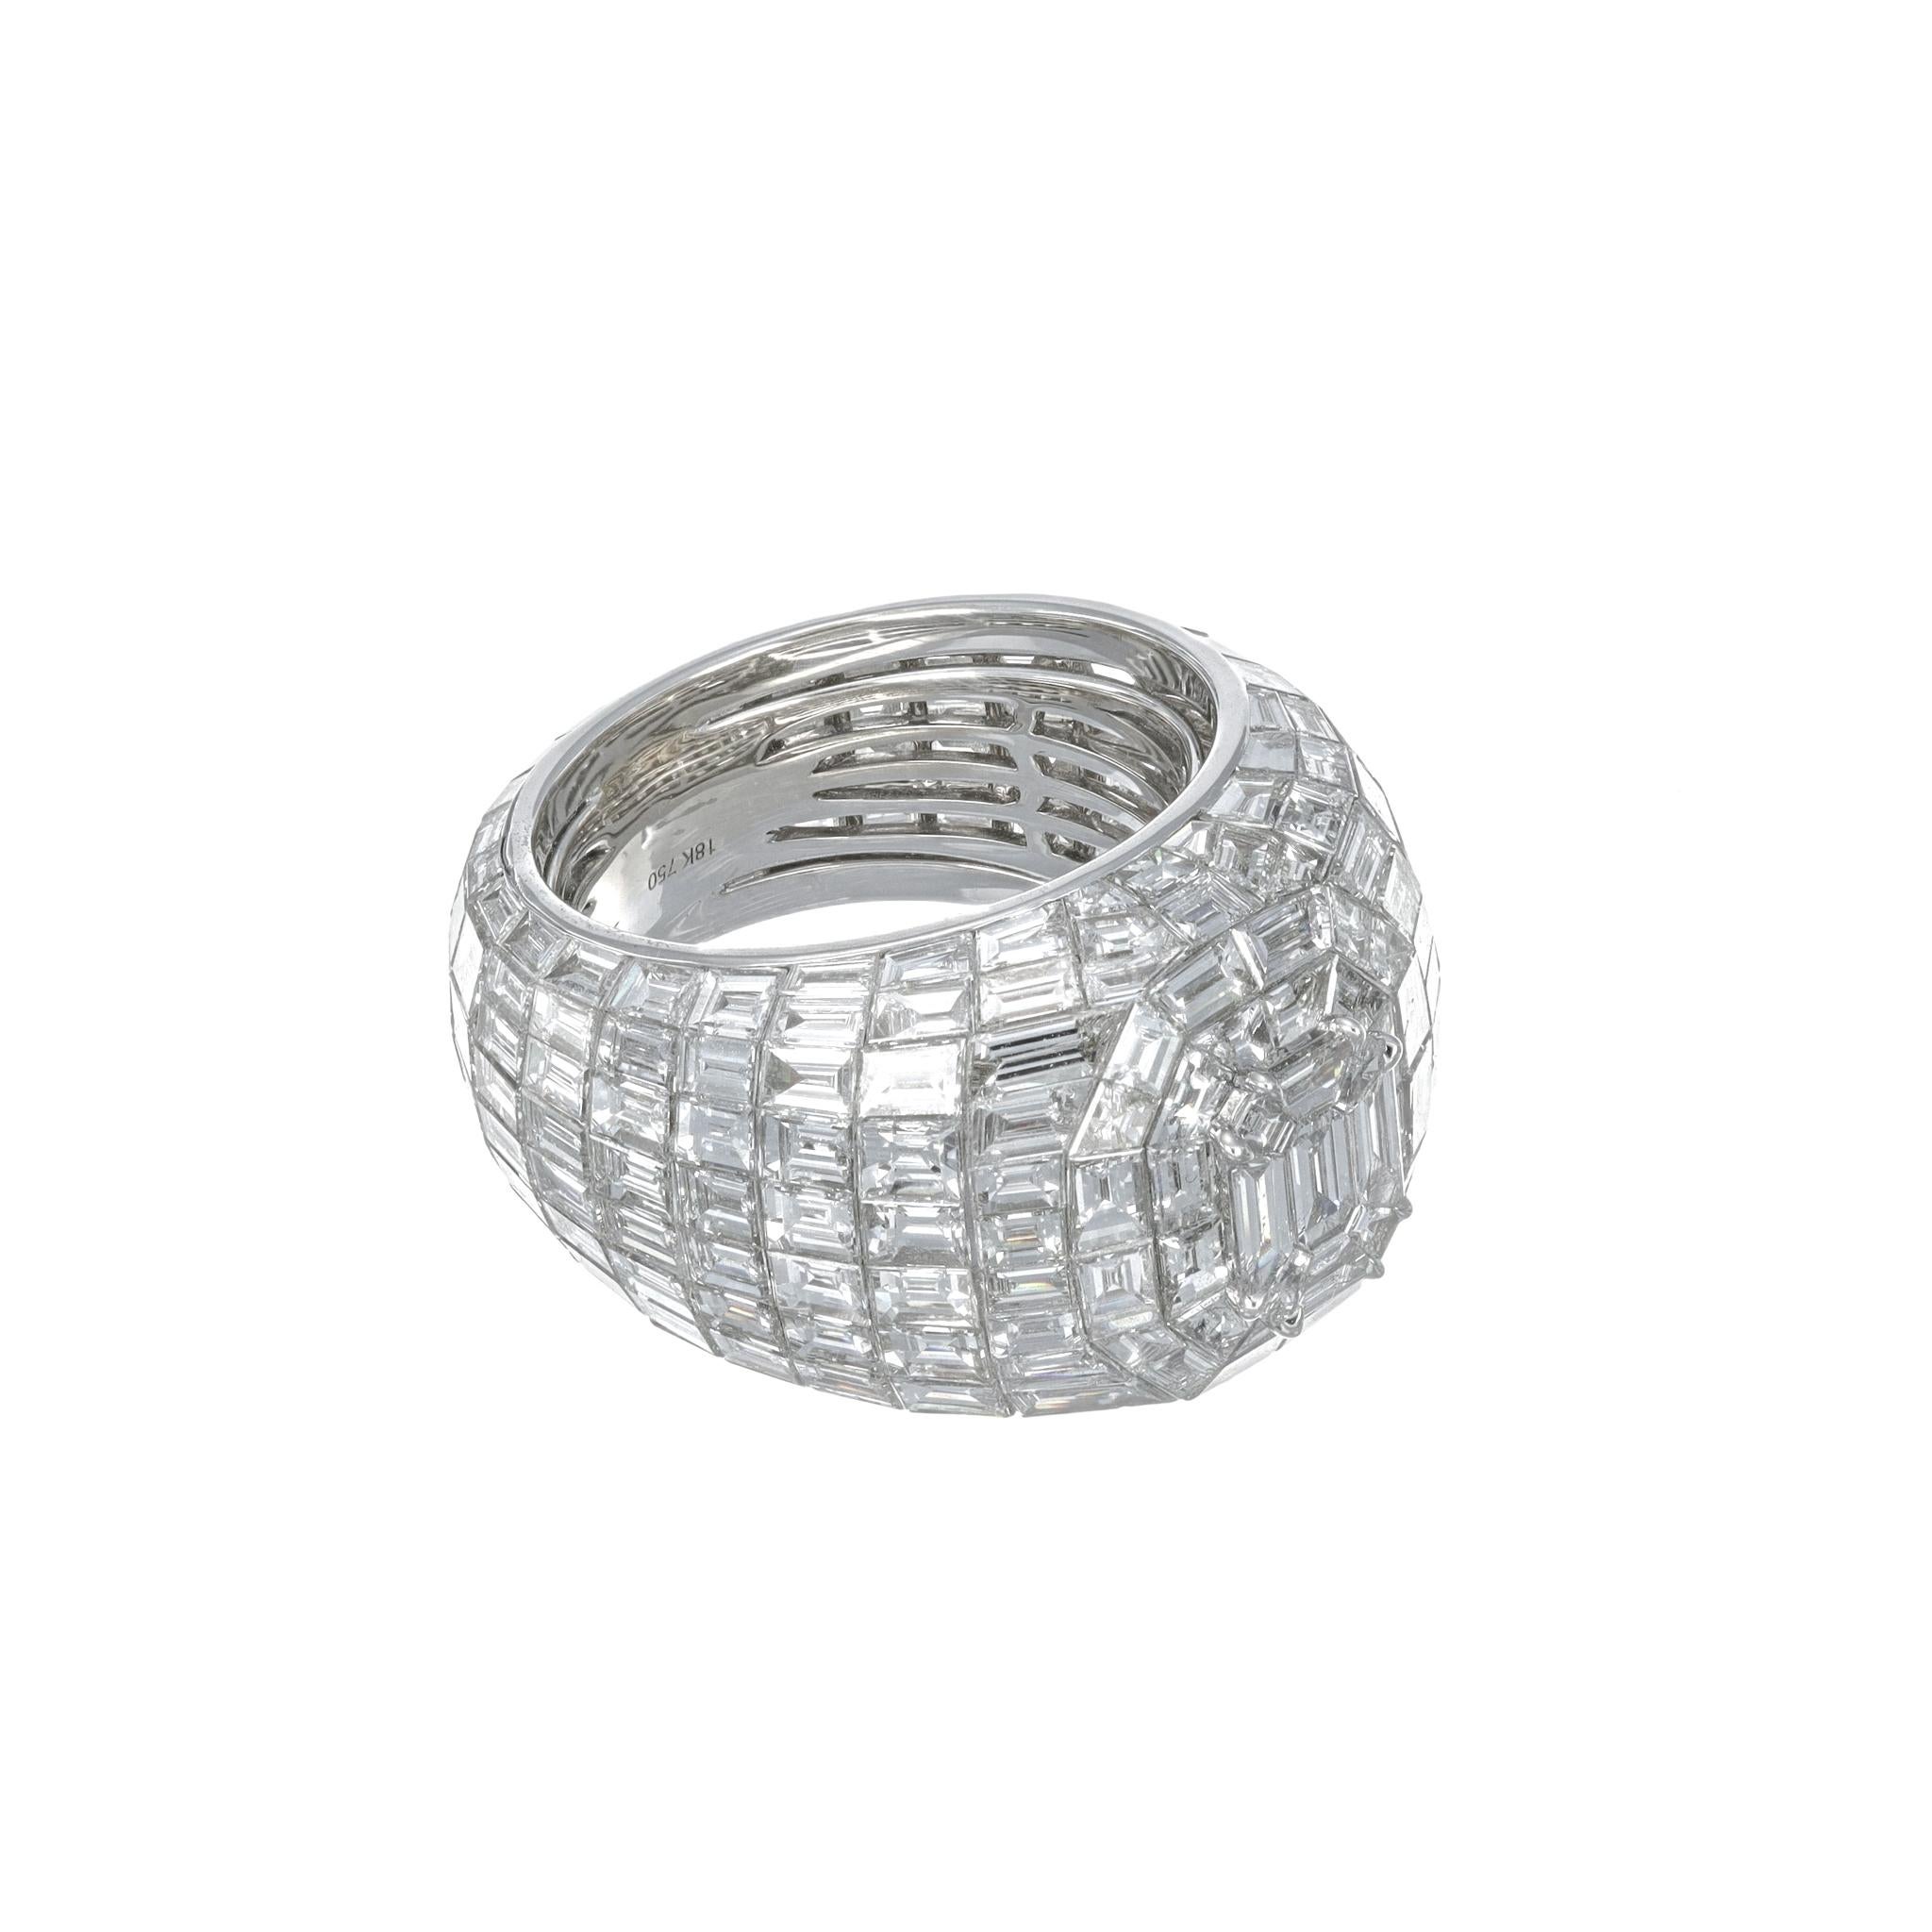 The Baguette Diamonds ring is not only a symbol of luxury and high-end design but also a dazzling accessory that you can confidently wear to any party. This cocktail ring, boasting a staggering 22.60 carats of baguette diamonds, is the epitome of